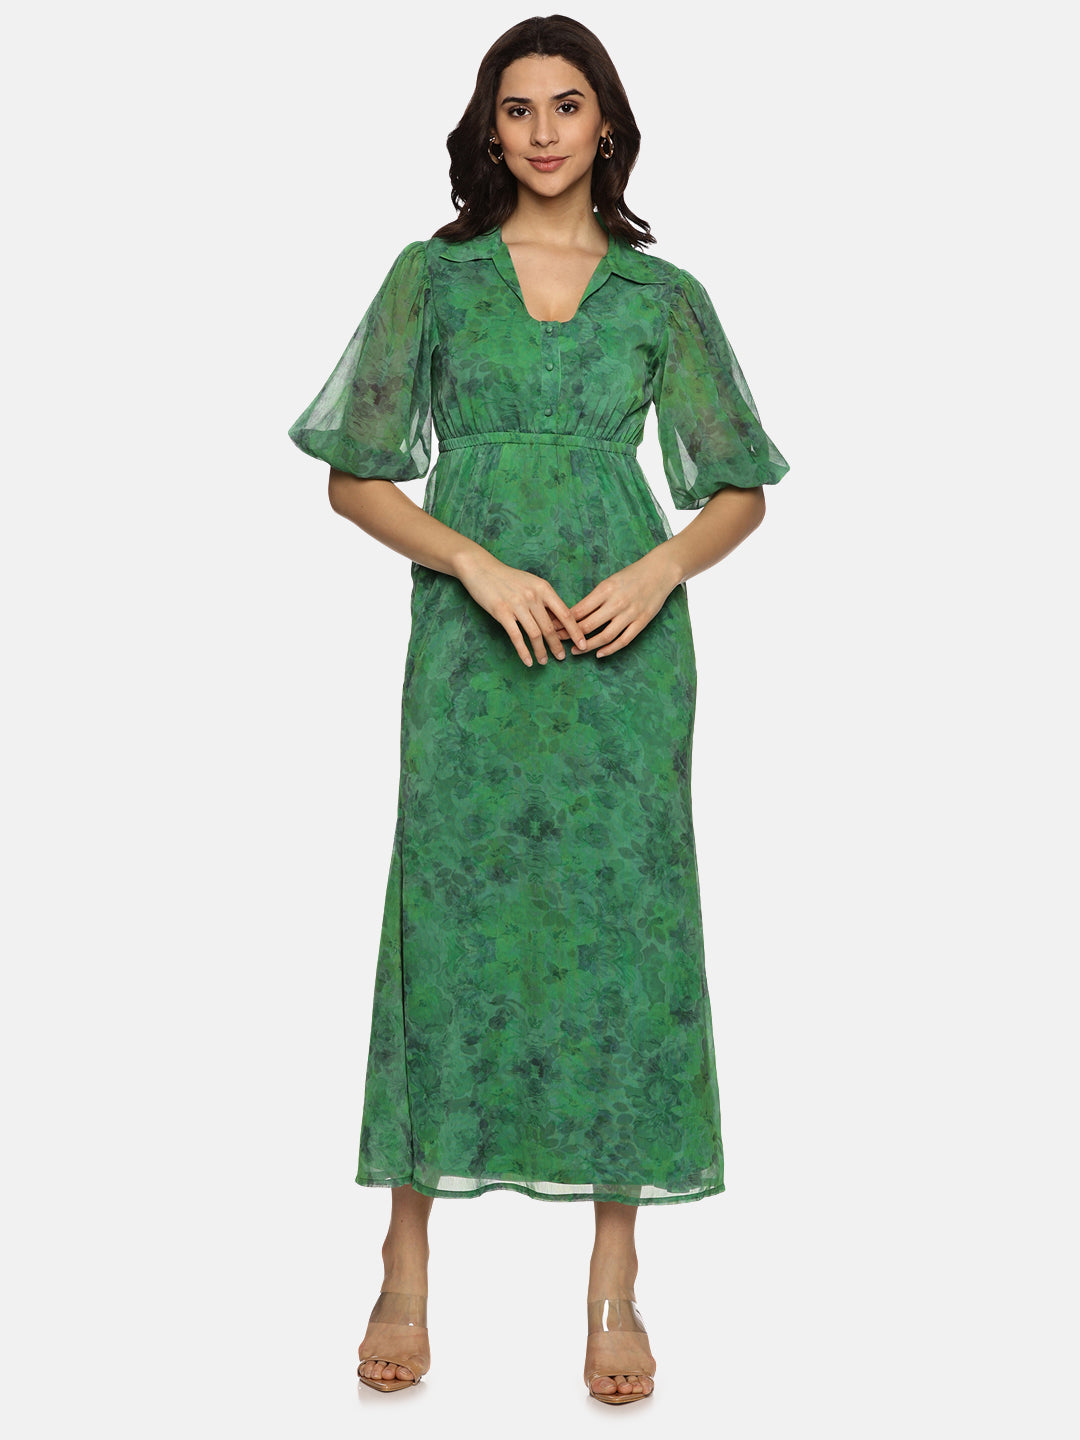 Buy Green Printed Floral Chiffon Fabric | Shirt Collared Maxi Dress Online In India